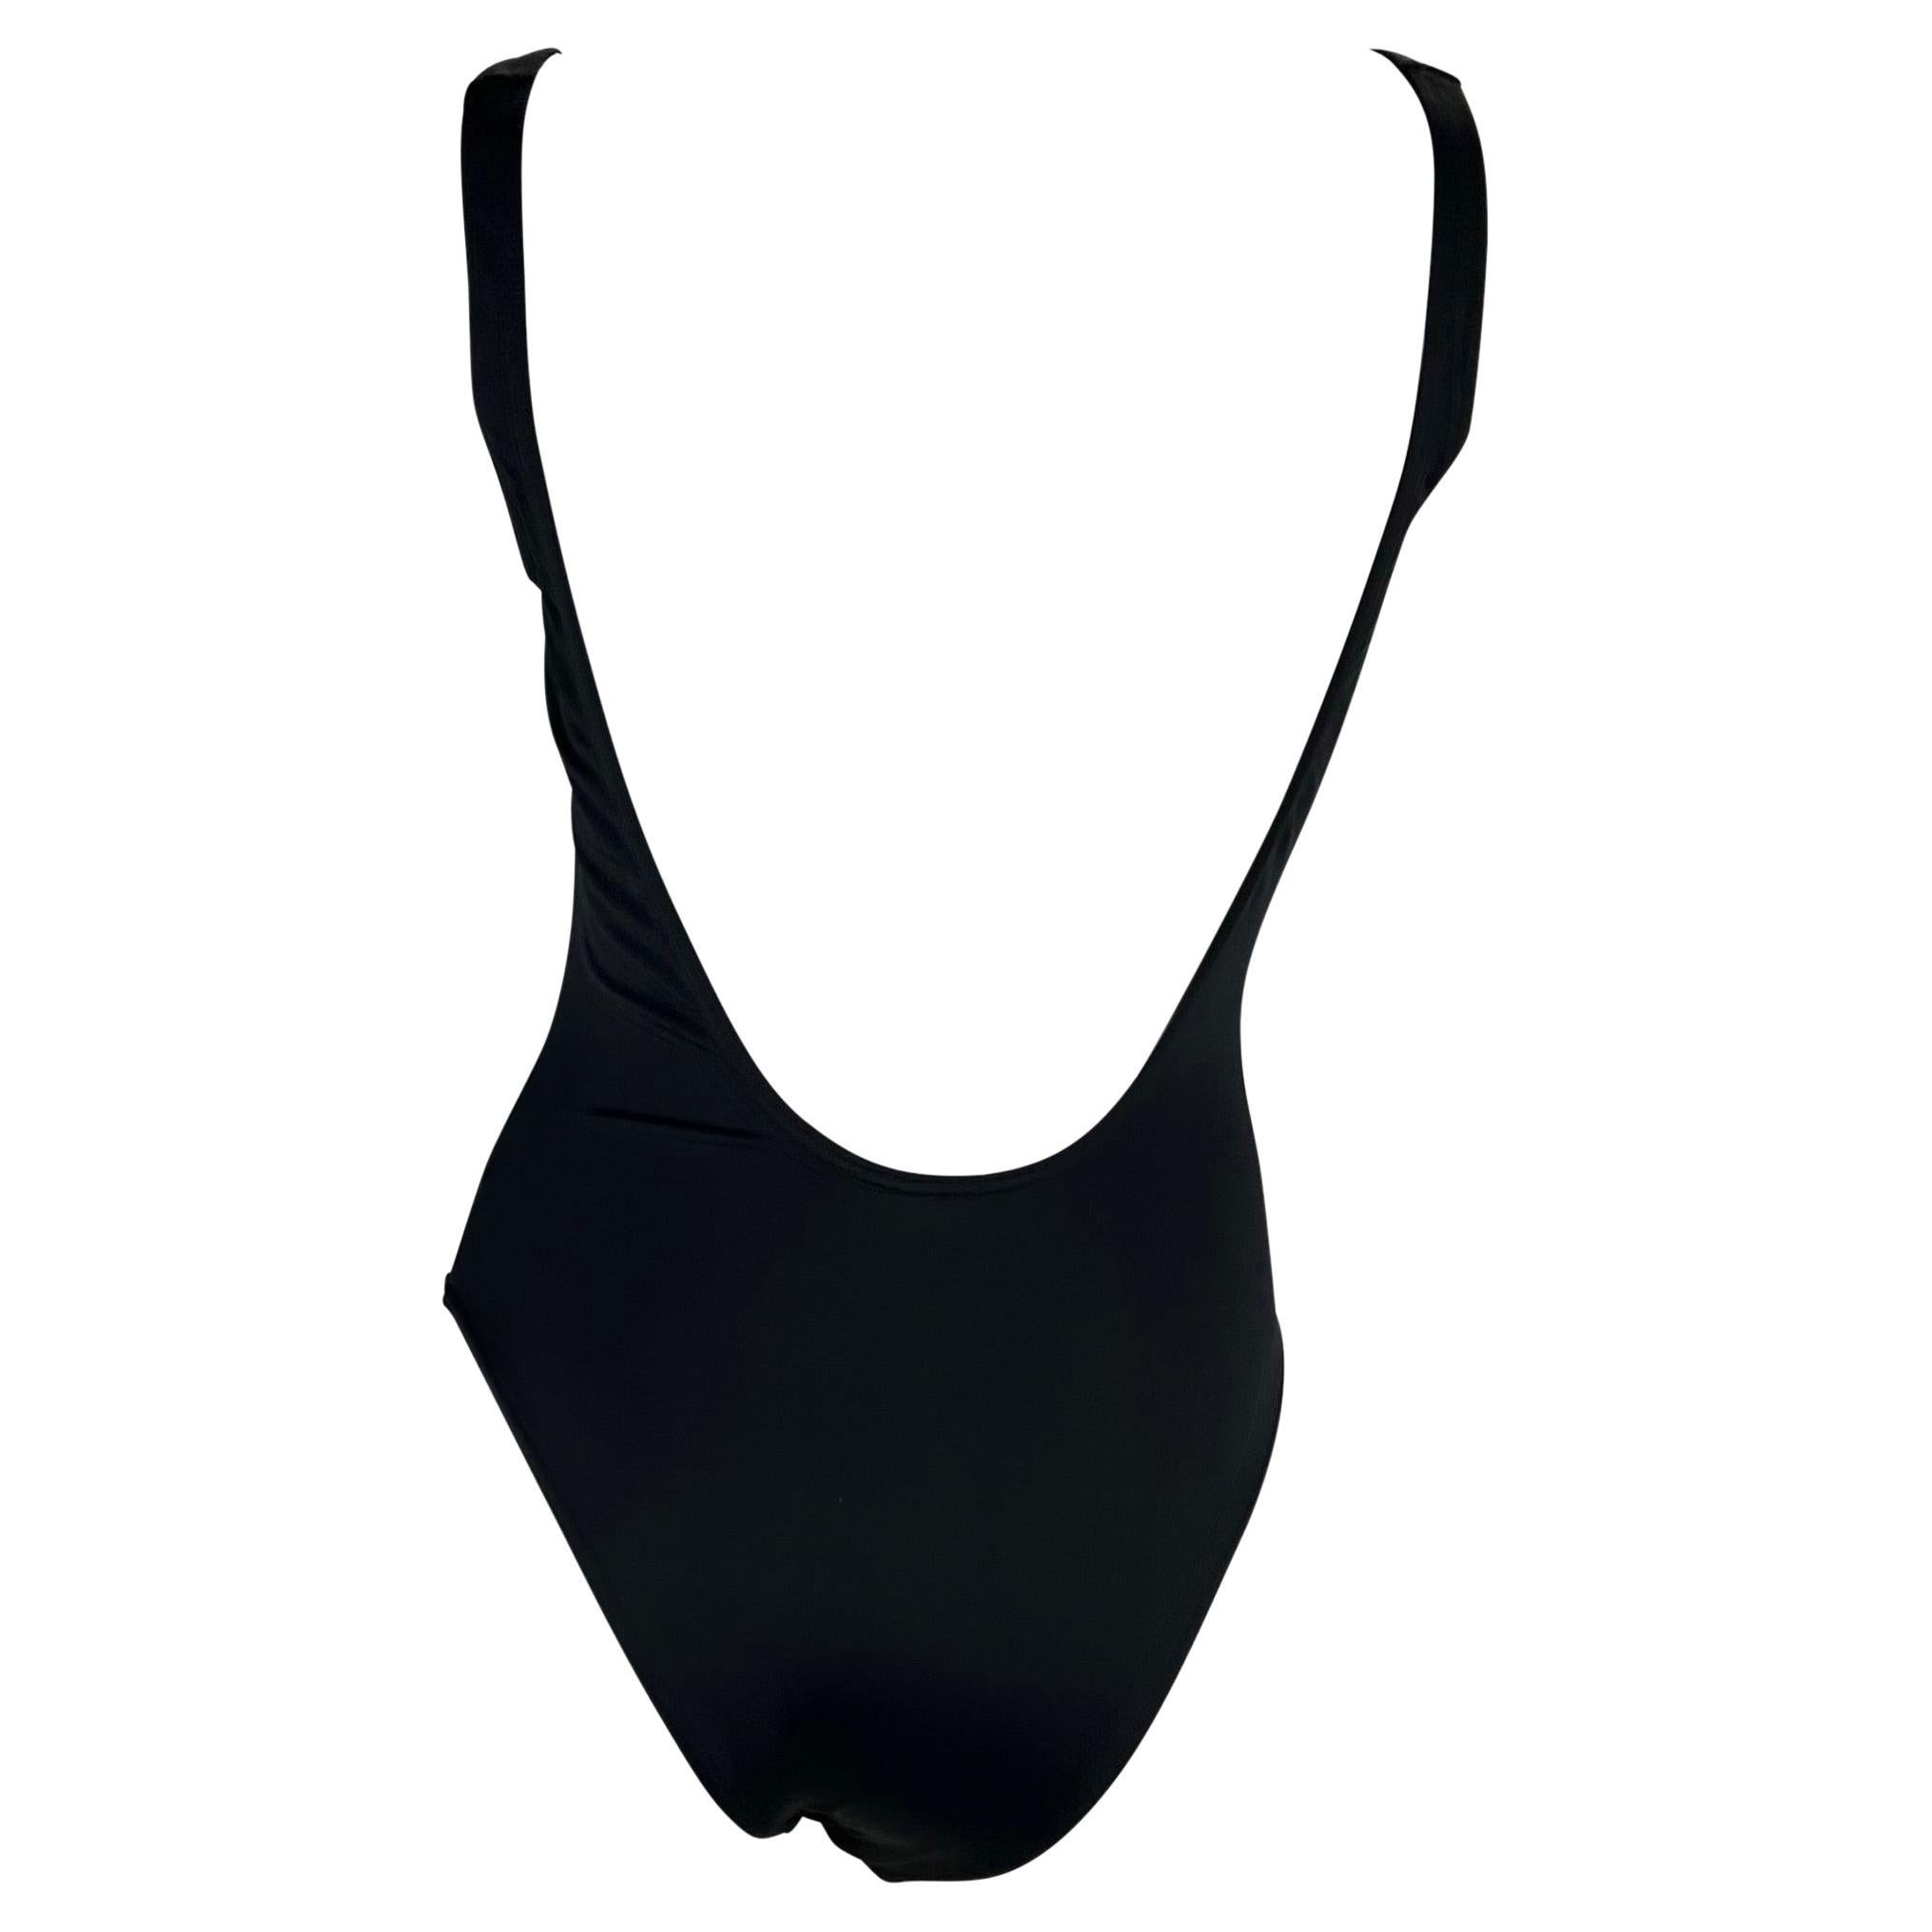 gucci one piece swimsuit